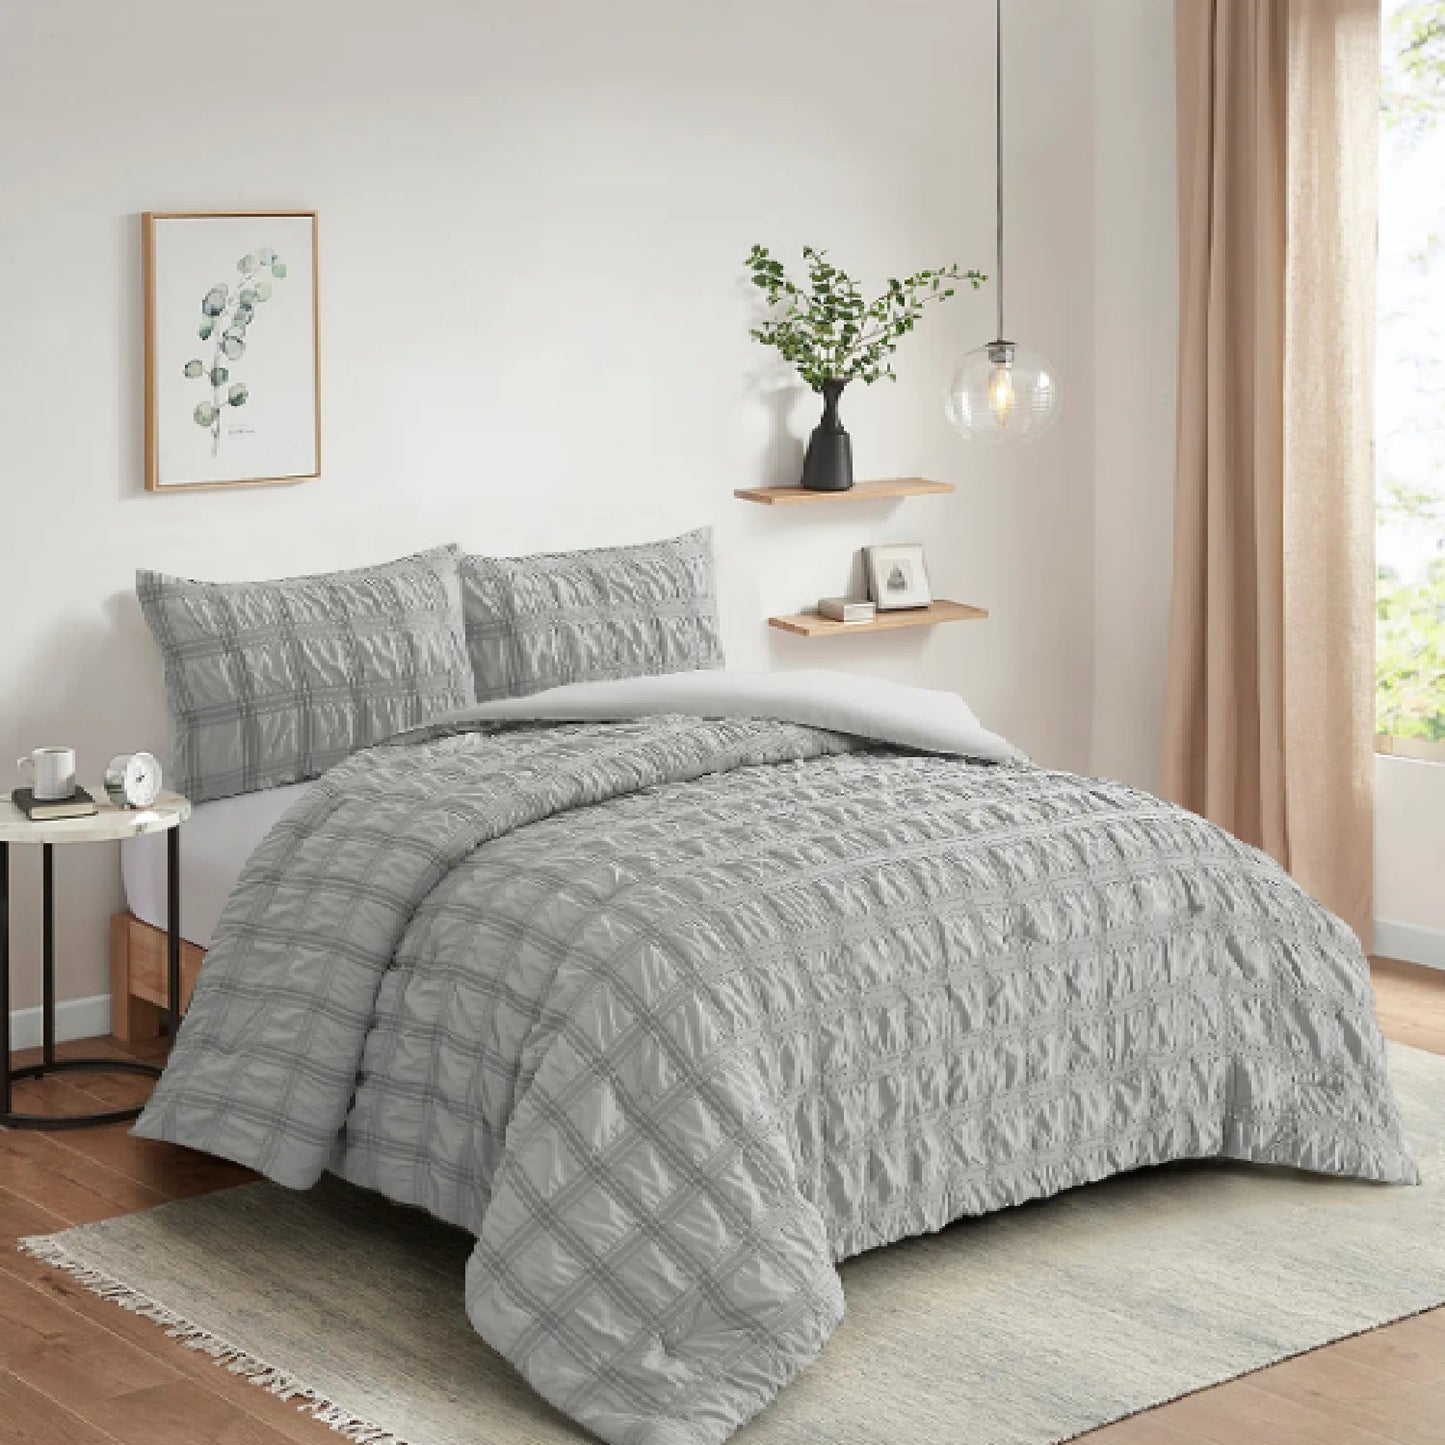 Breathable and Stylish Bedding Set for Year-Round Comfort - Grey